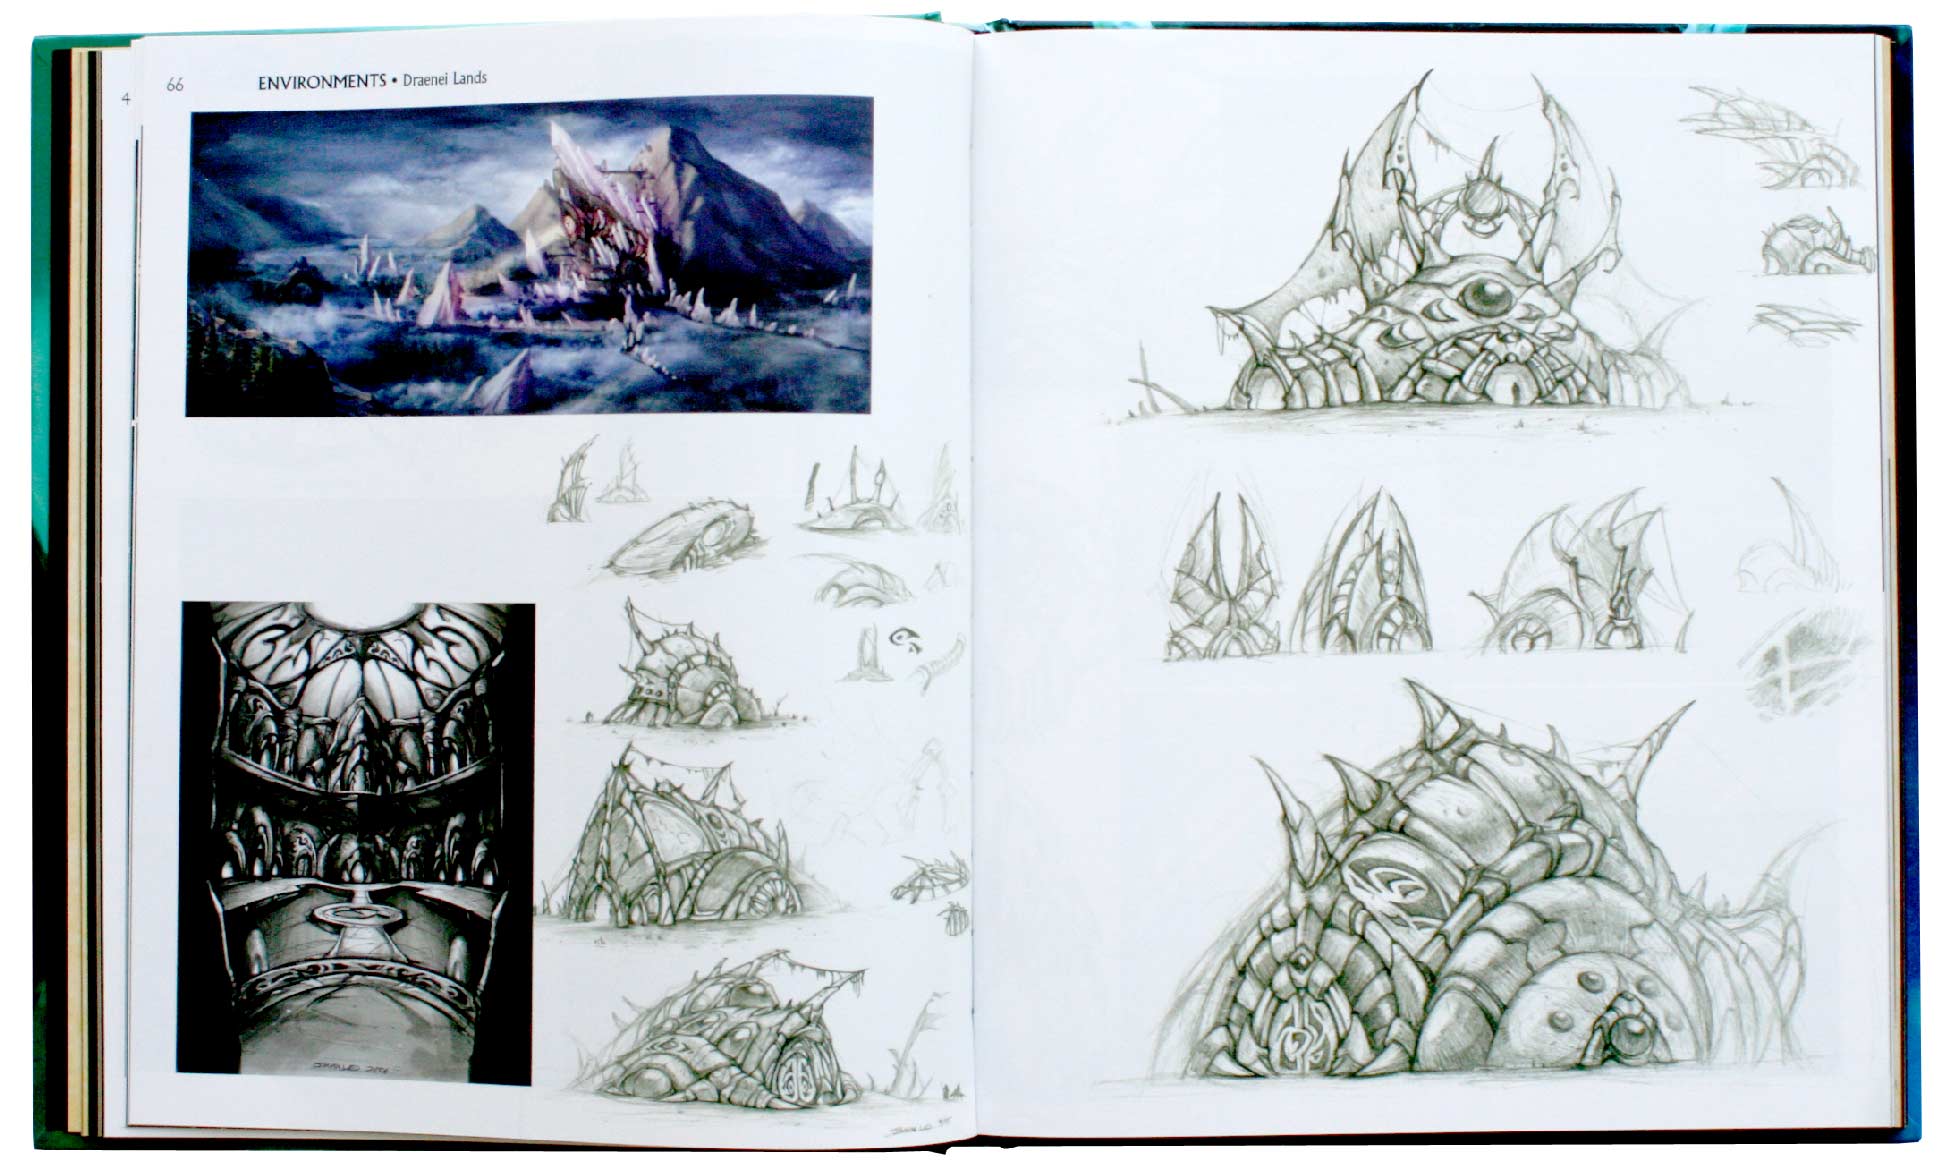 Page 66 et 67 de l'Art book : The Art of the Burning Crusade (World of Warcraft)